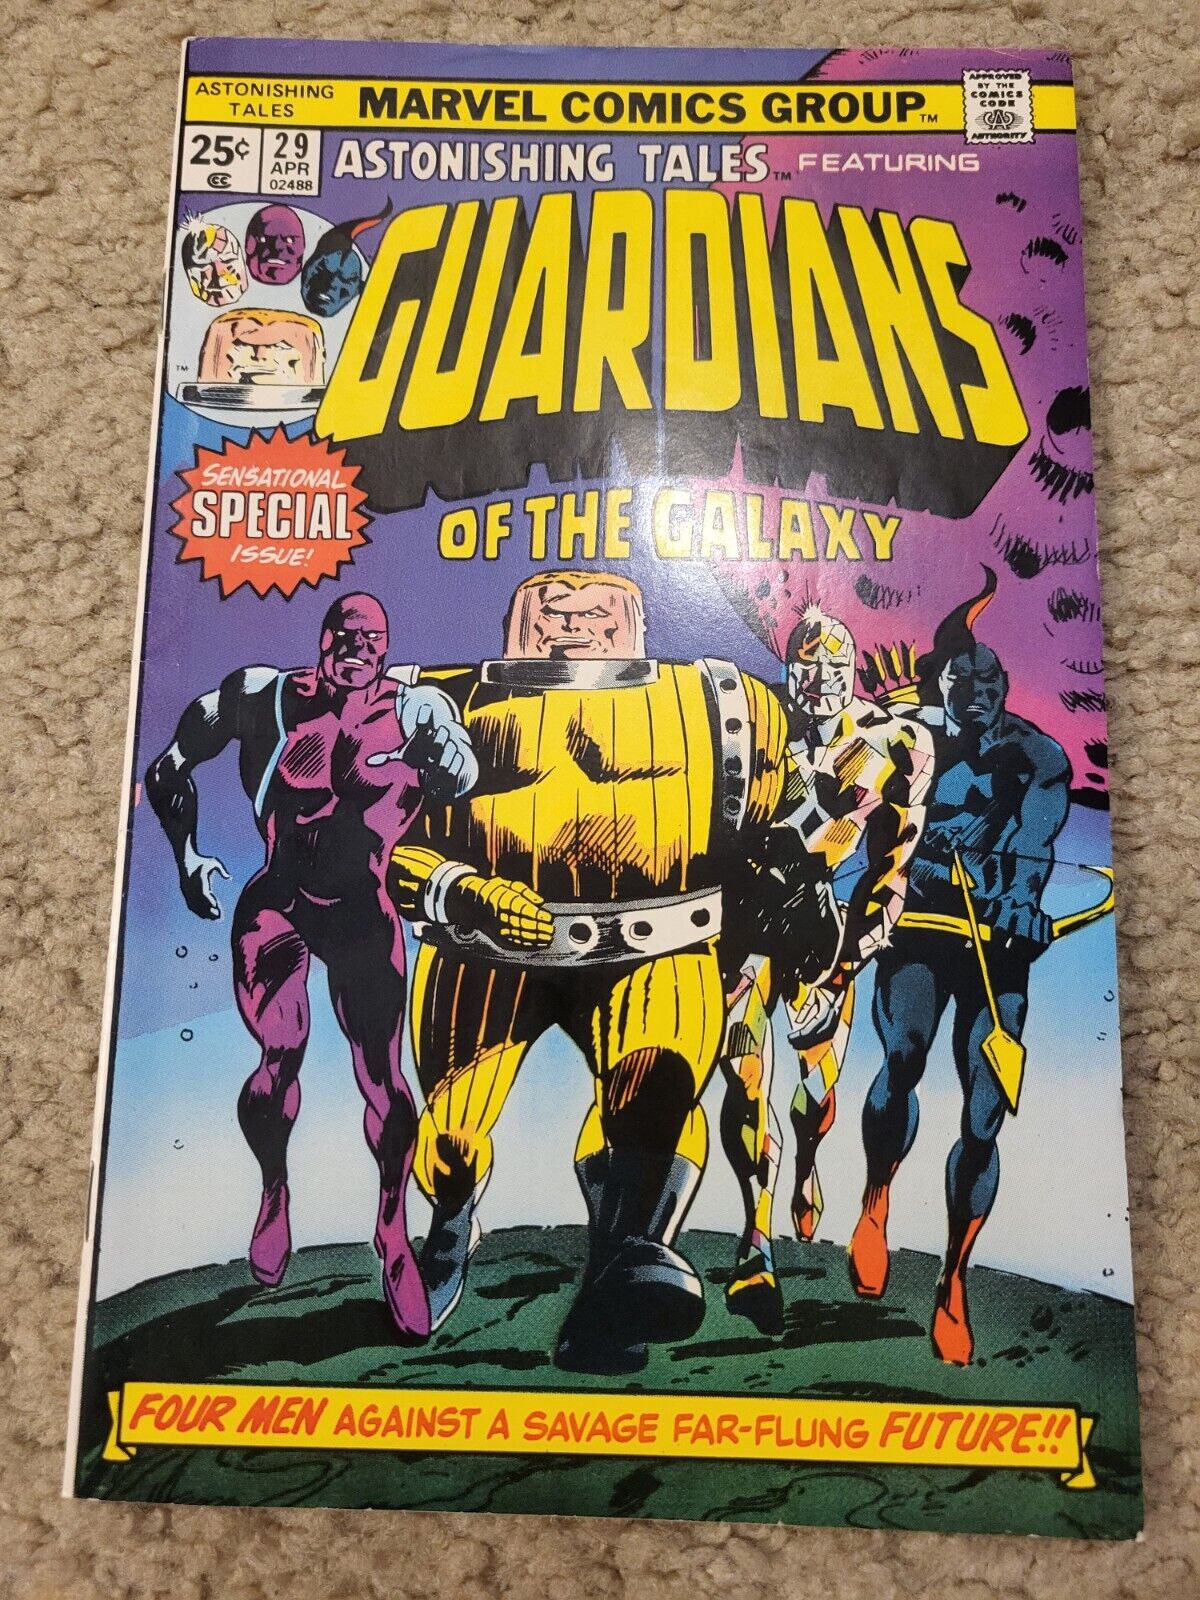 Astonishing Tales 29 Featuring GUARDIANS OF THE GALAXY 1975 HIGH GRADE